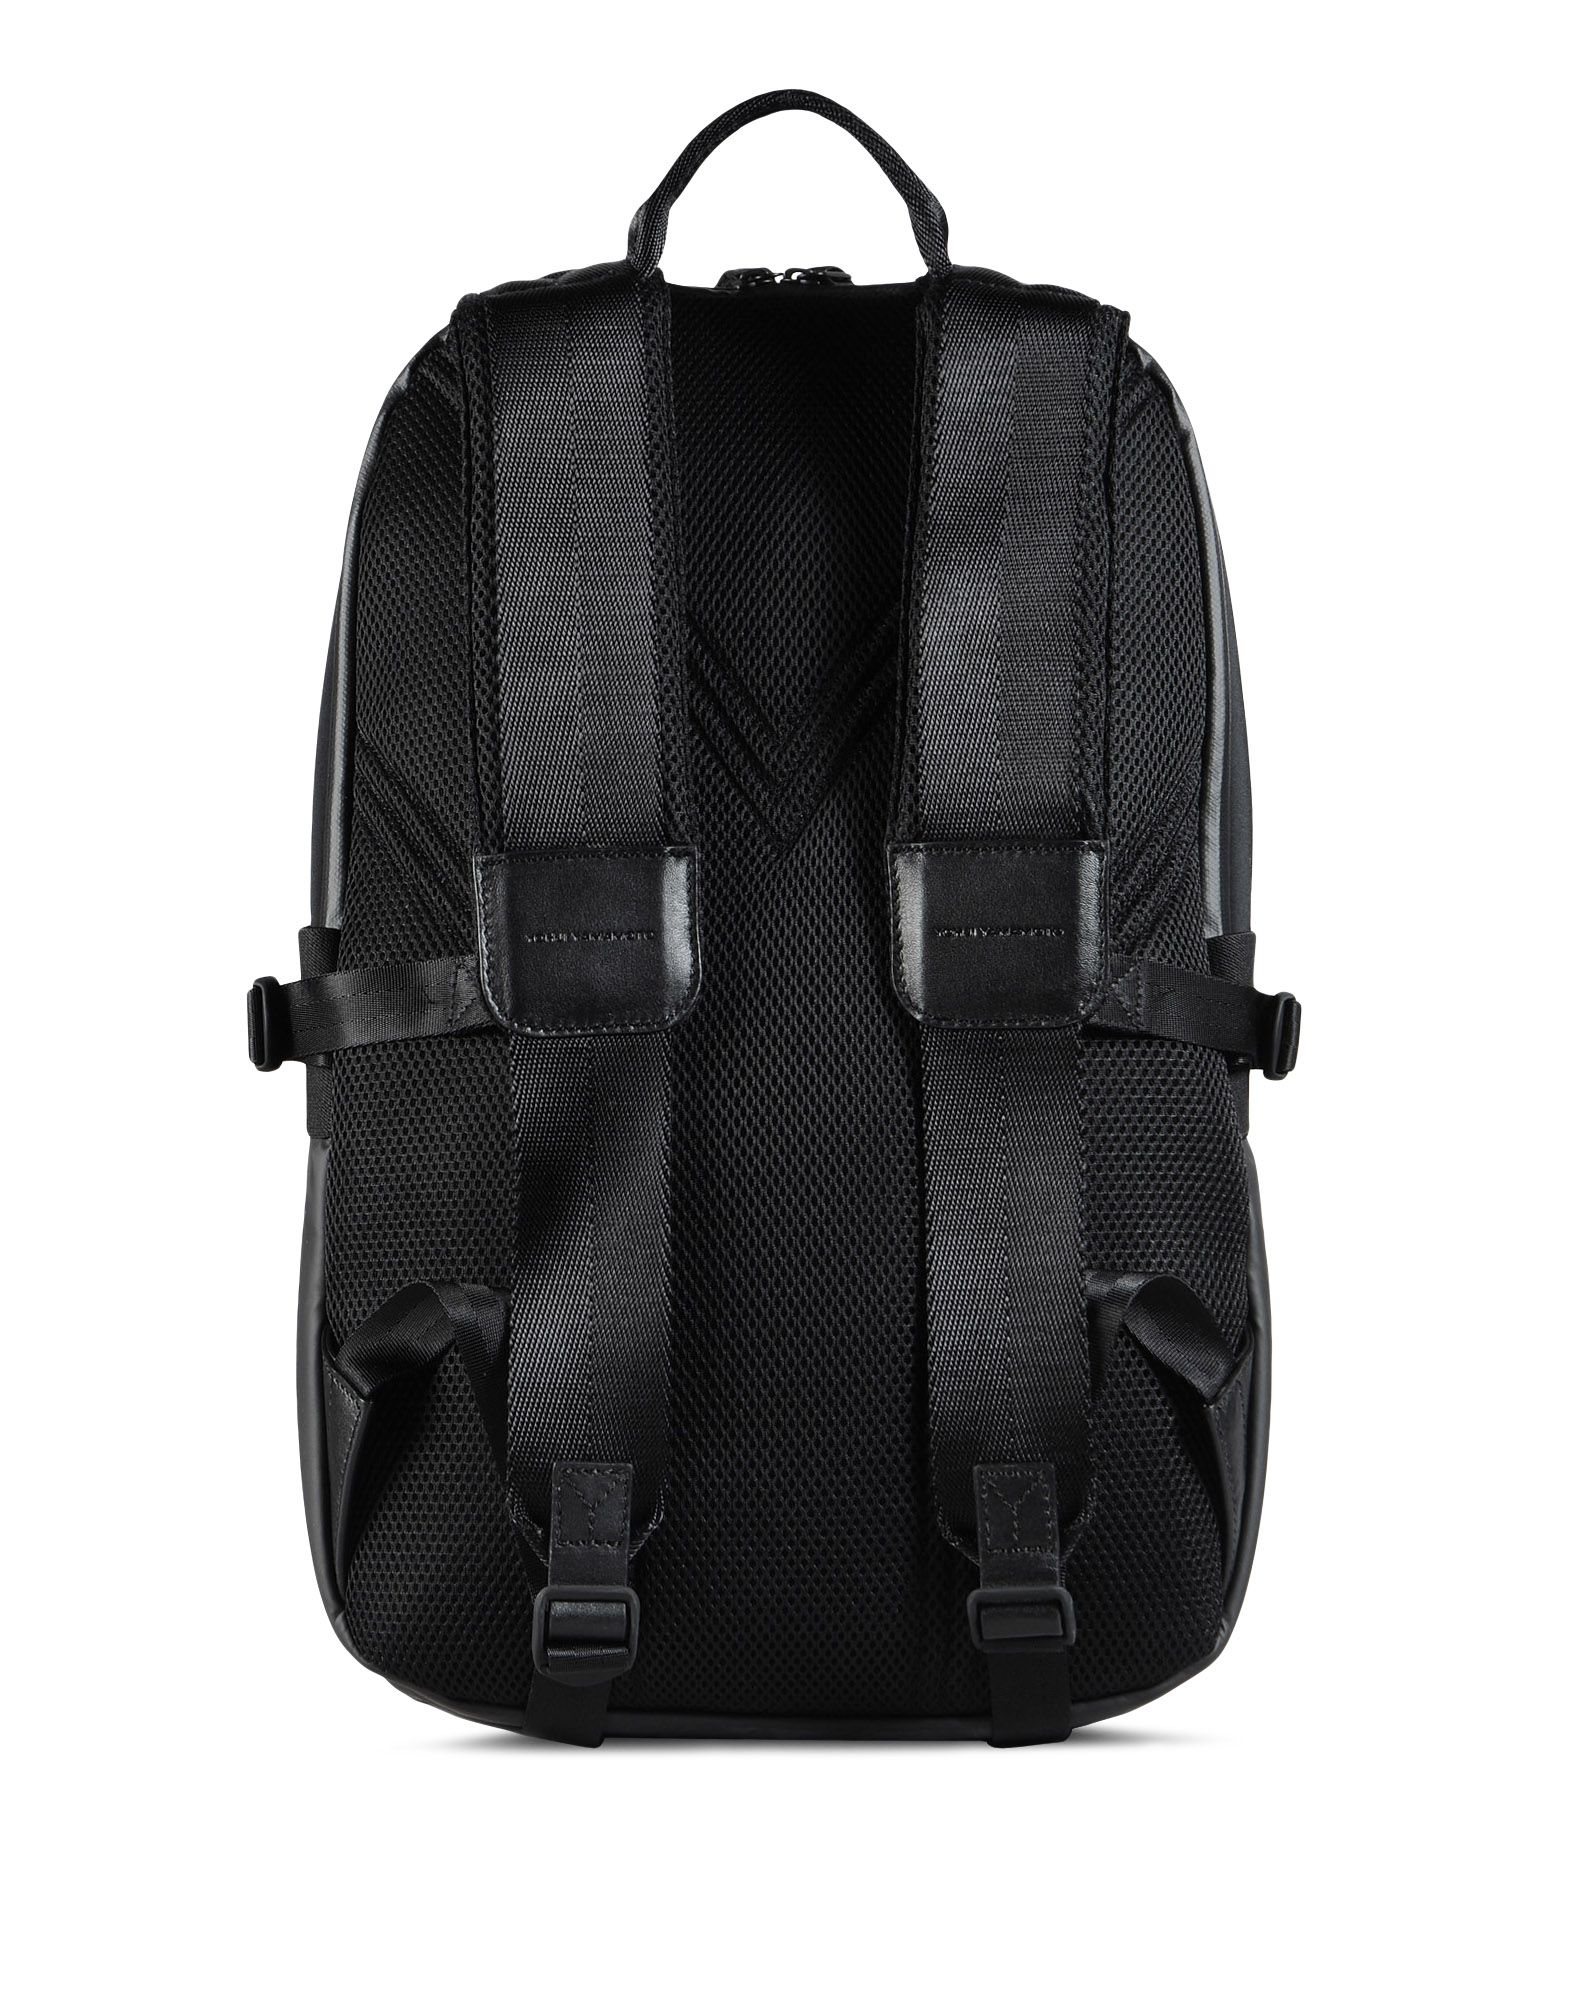 Y 3 QASA BACKPACK for Women | Adidas Y-3 Official Store